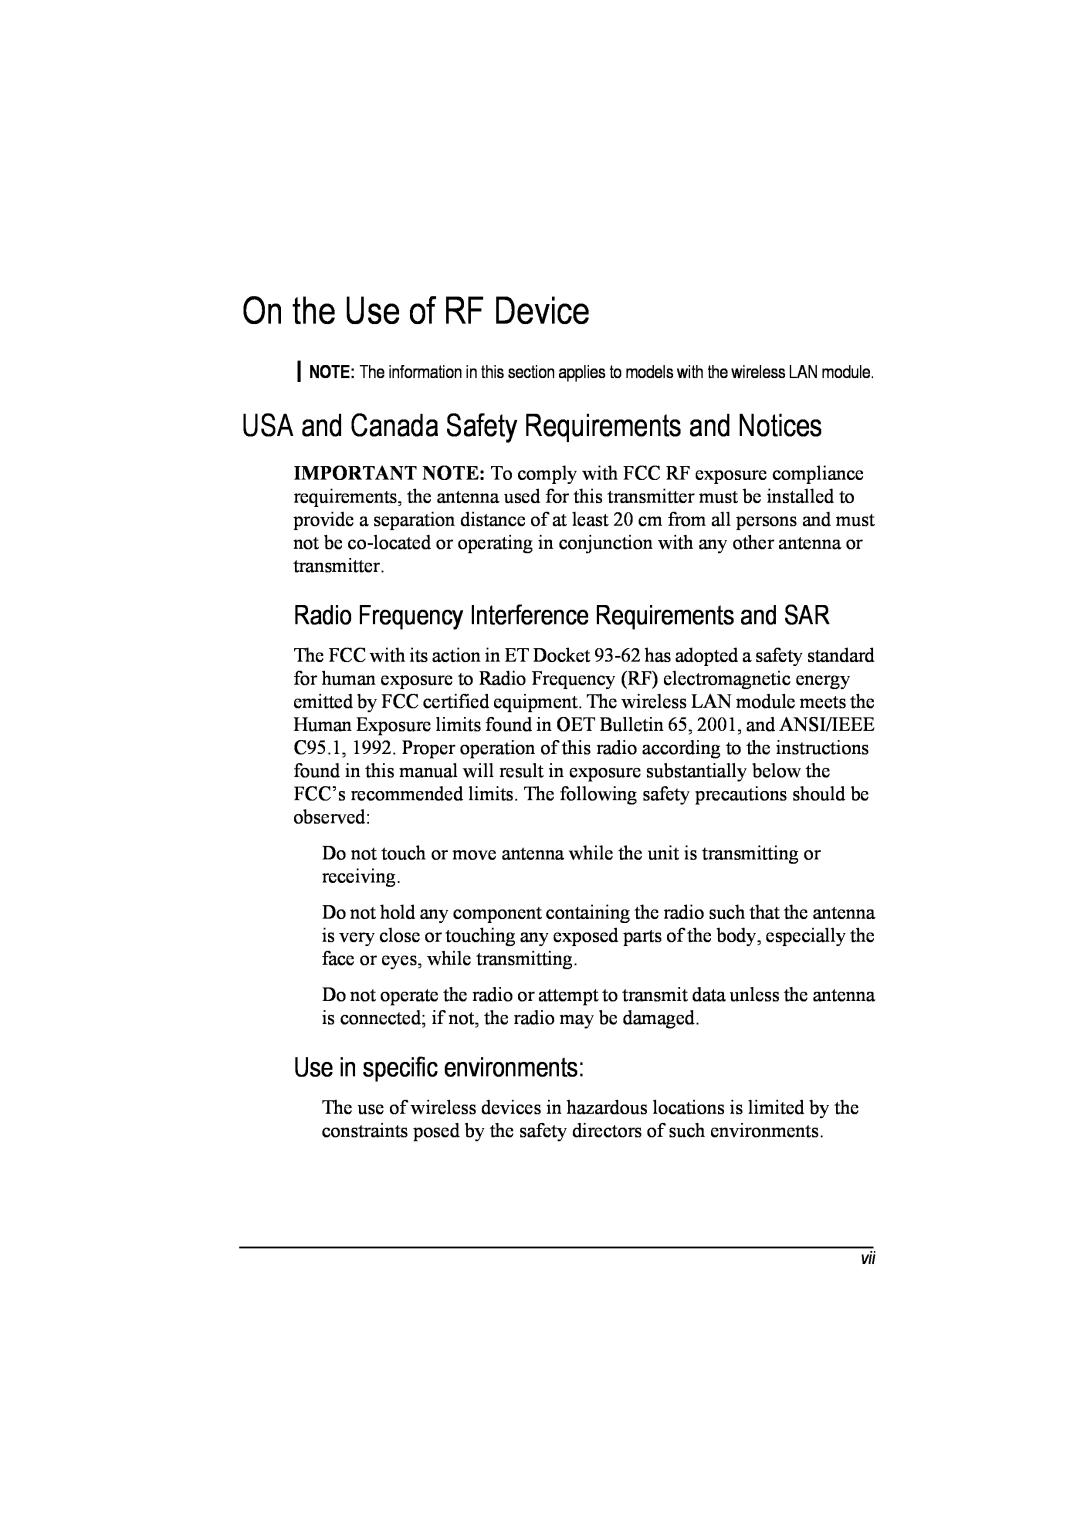 TAG 20 Series manual On the Use of RF Device, USA and Canada Safety Requirements and Notices, Use in specific environments 